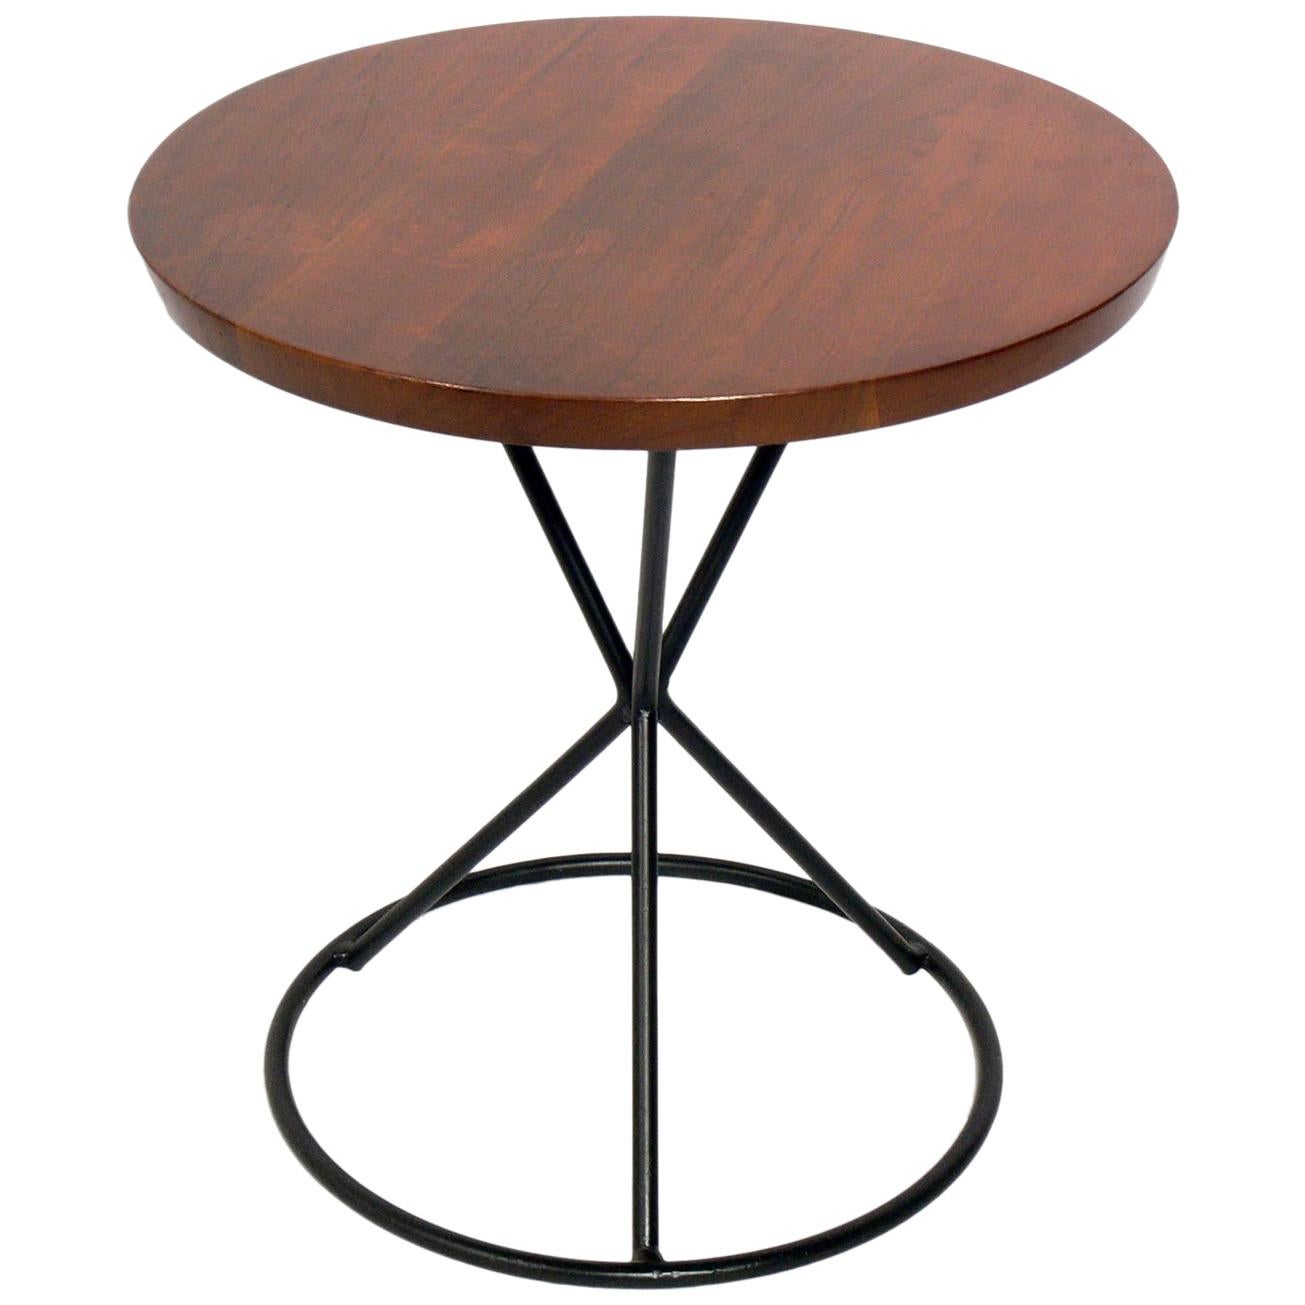 California Modern Walnut and Iron End Table